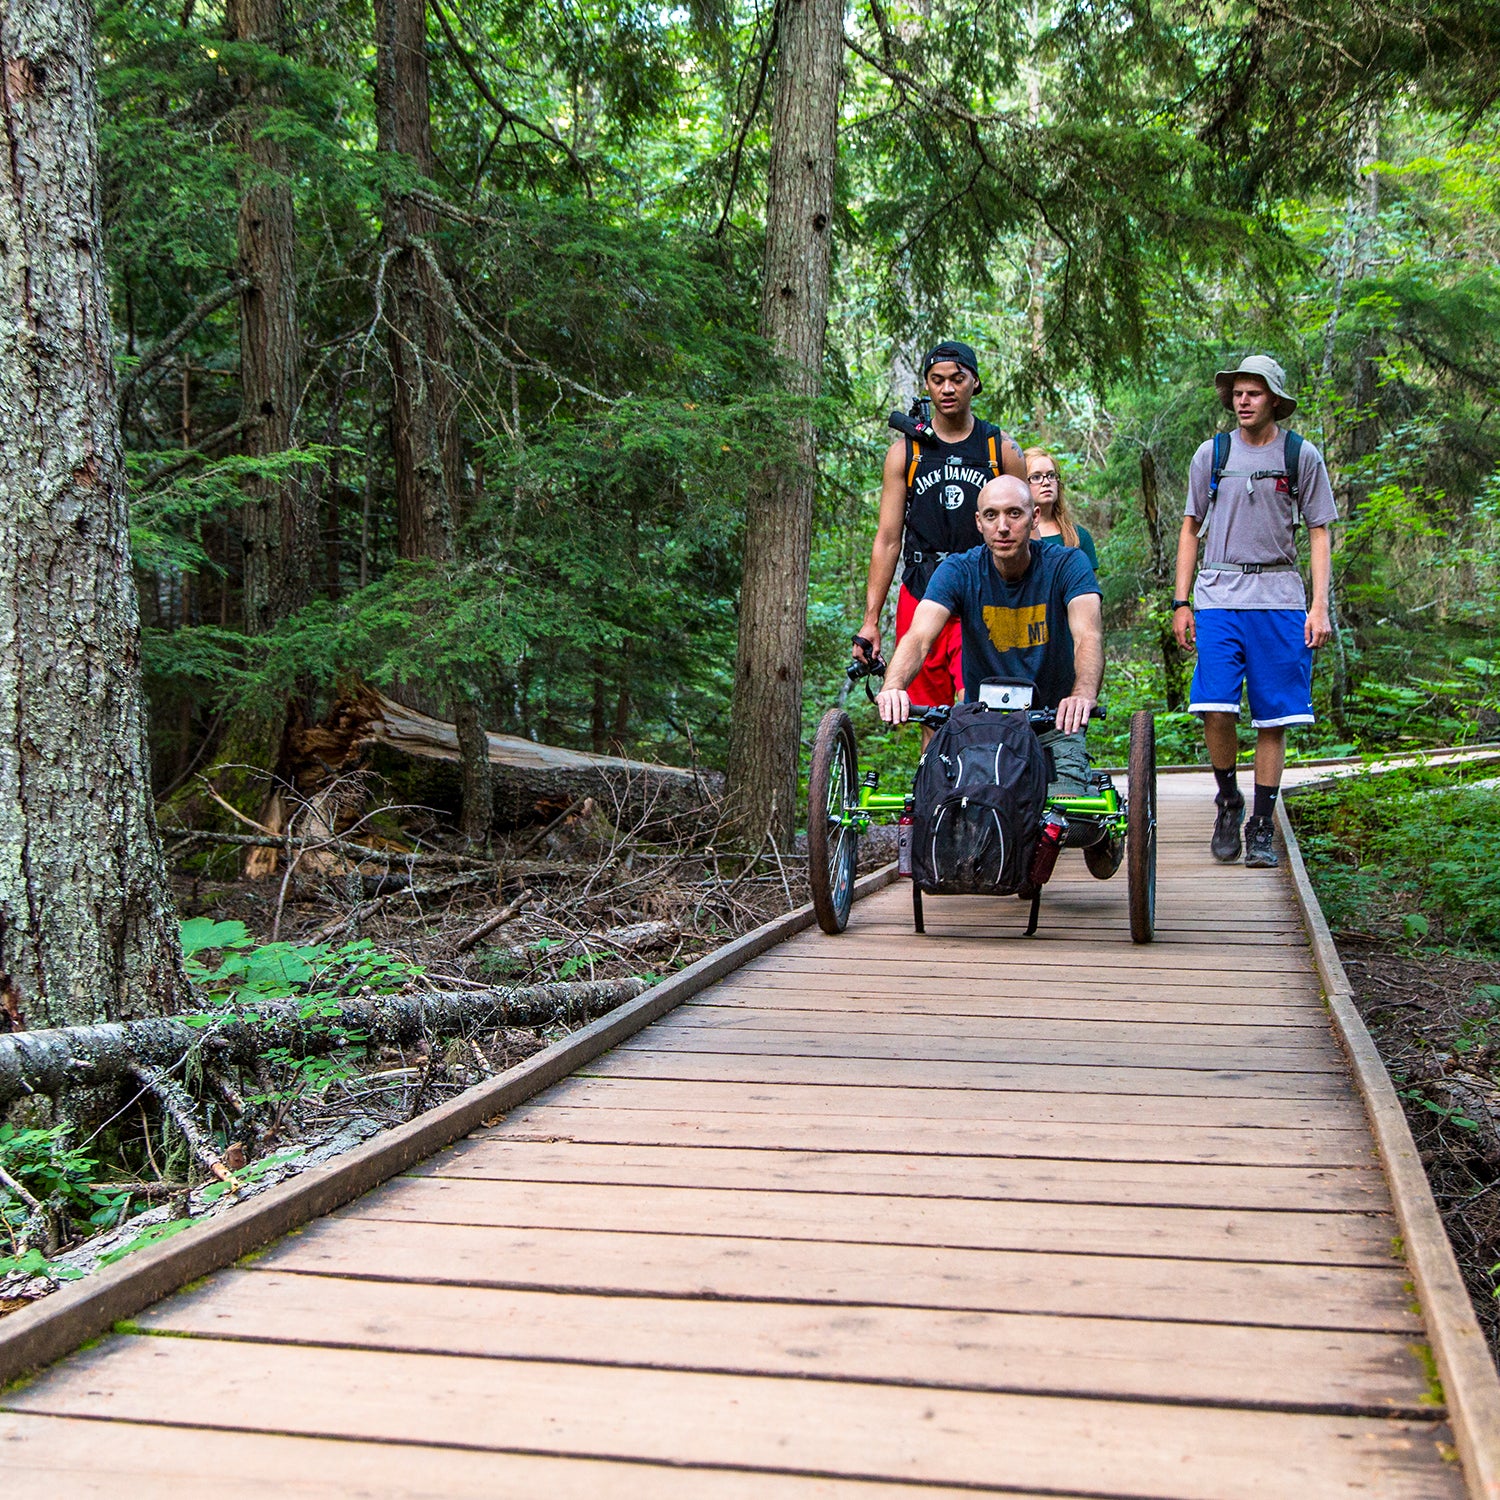 The Best National Parks for Those with Disabilities